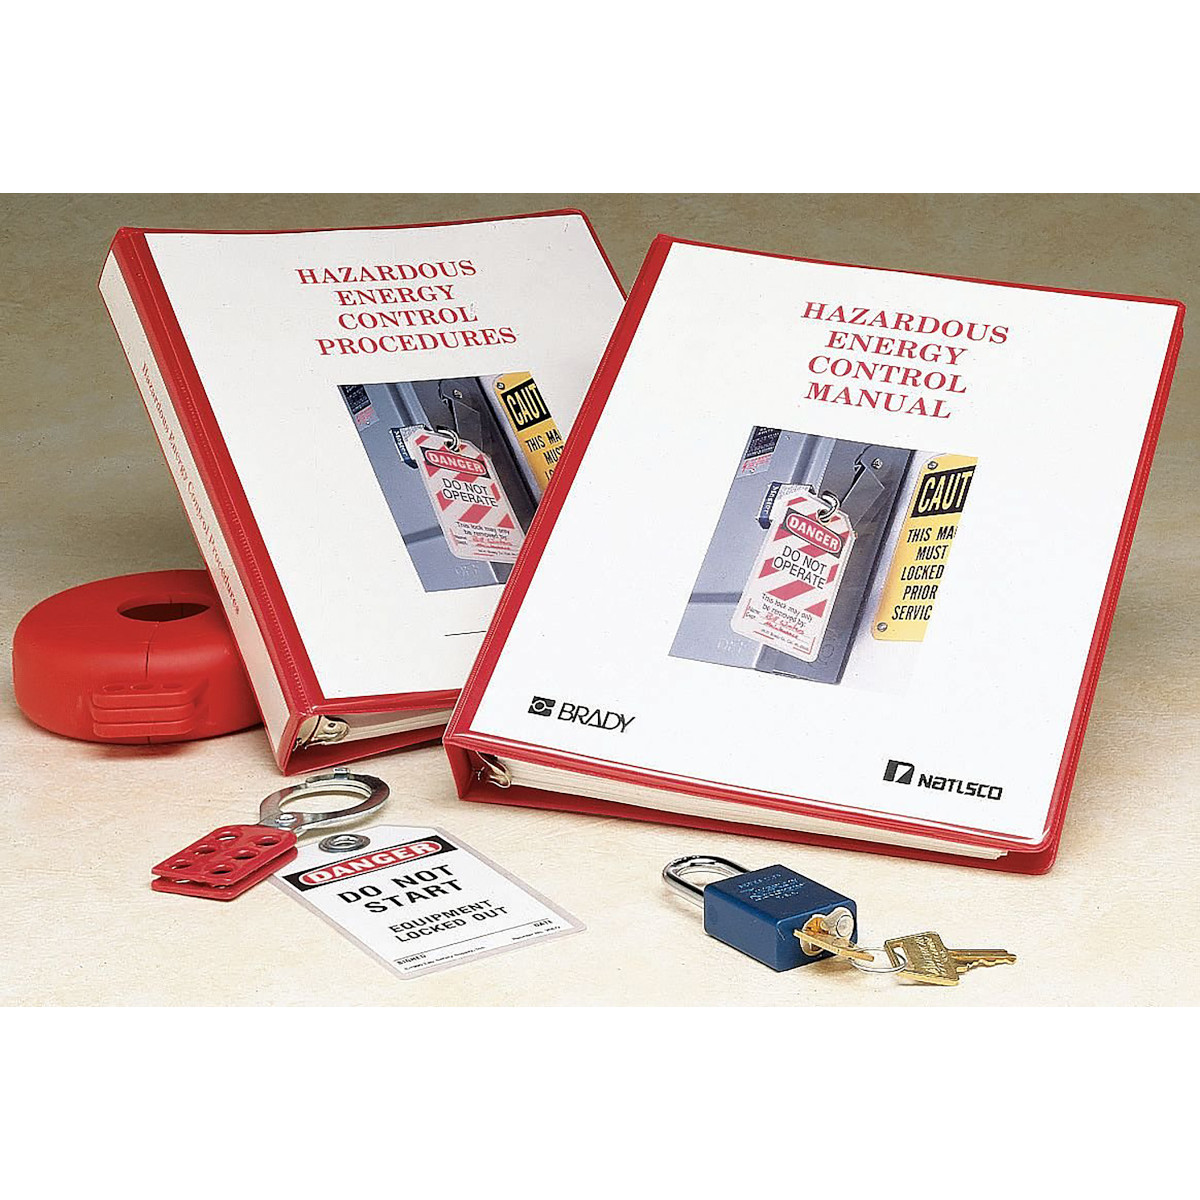 LOCKOUT COMPLIANCE MANUAL 65558